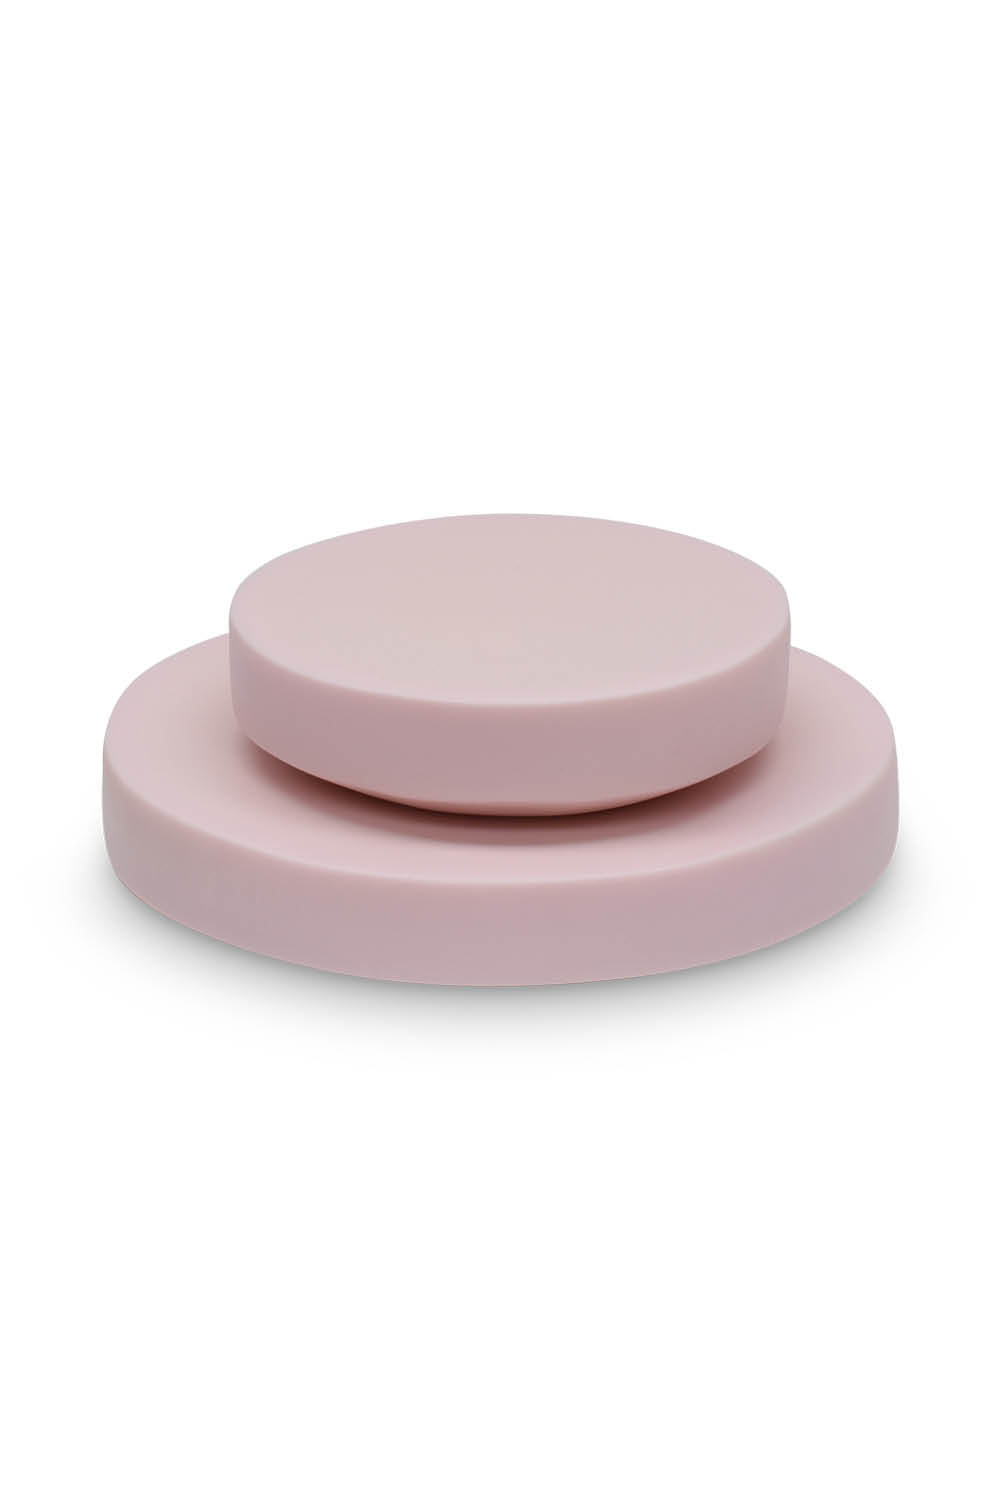 PLATEAU Small Platter in Pale Rose